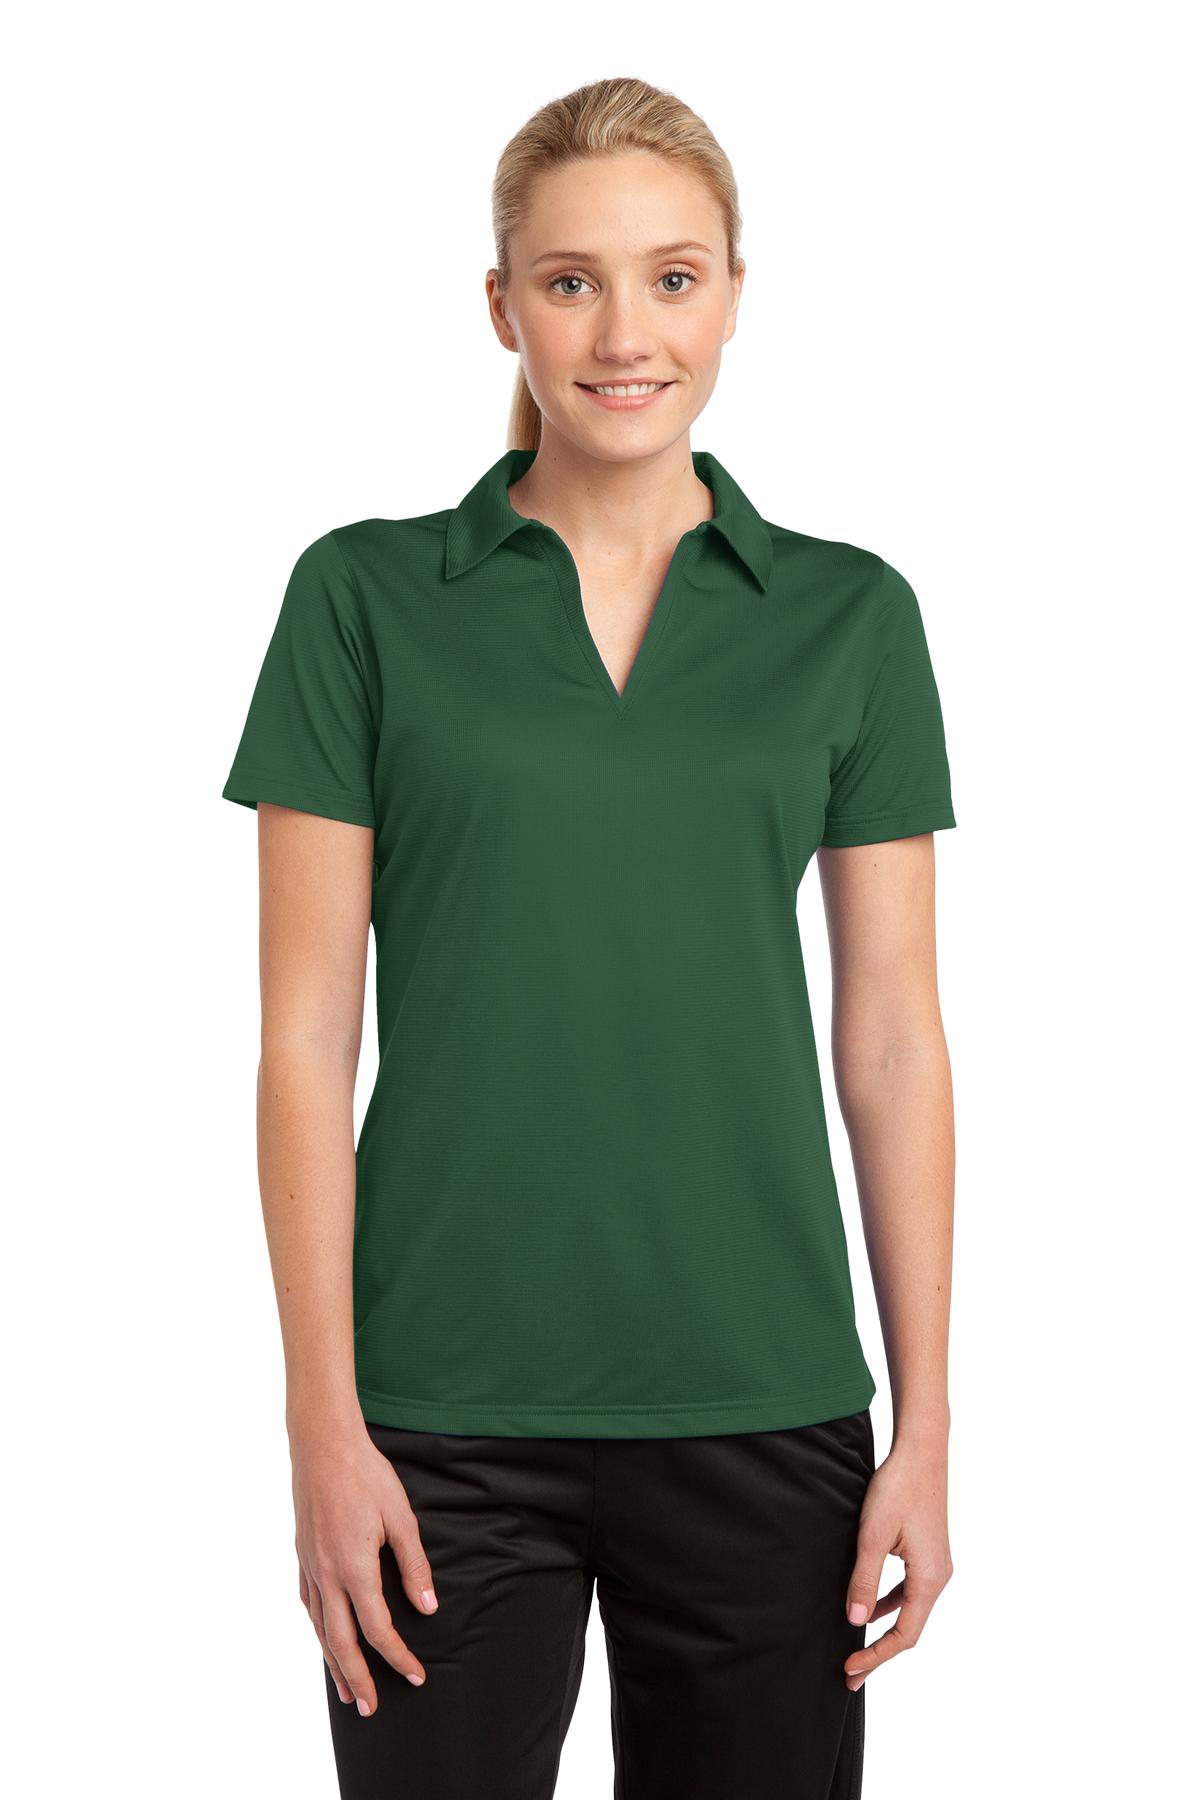 women's forest green polo shirts